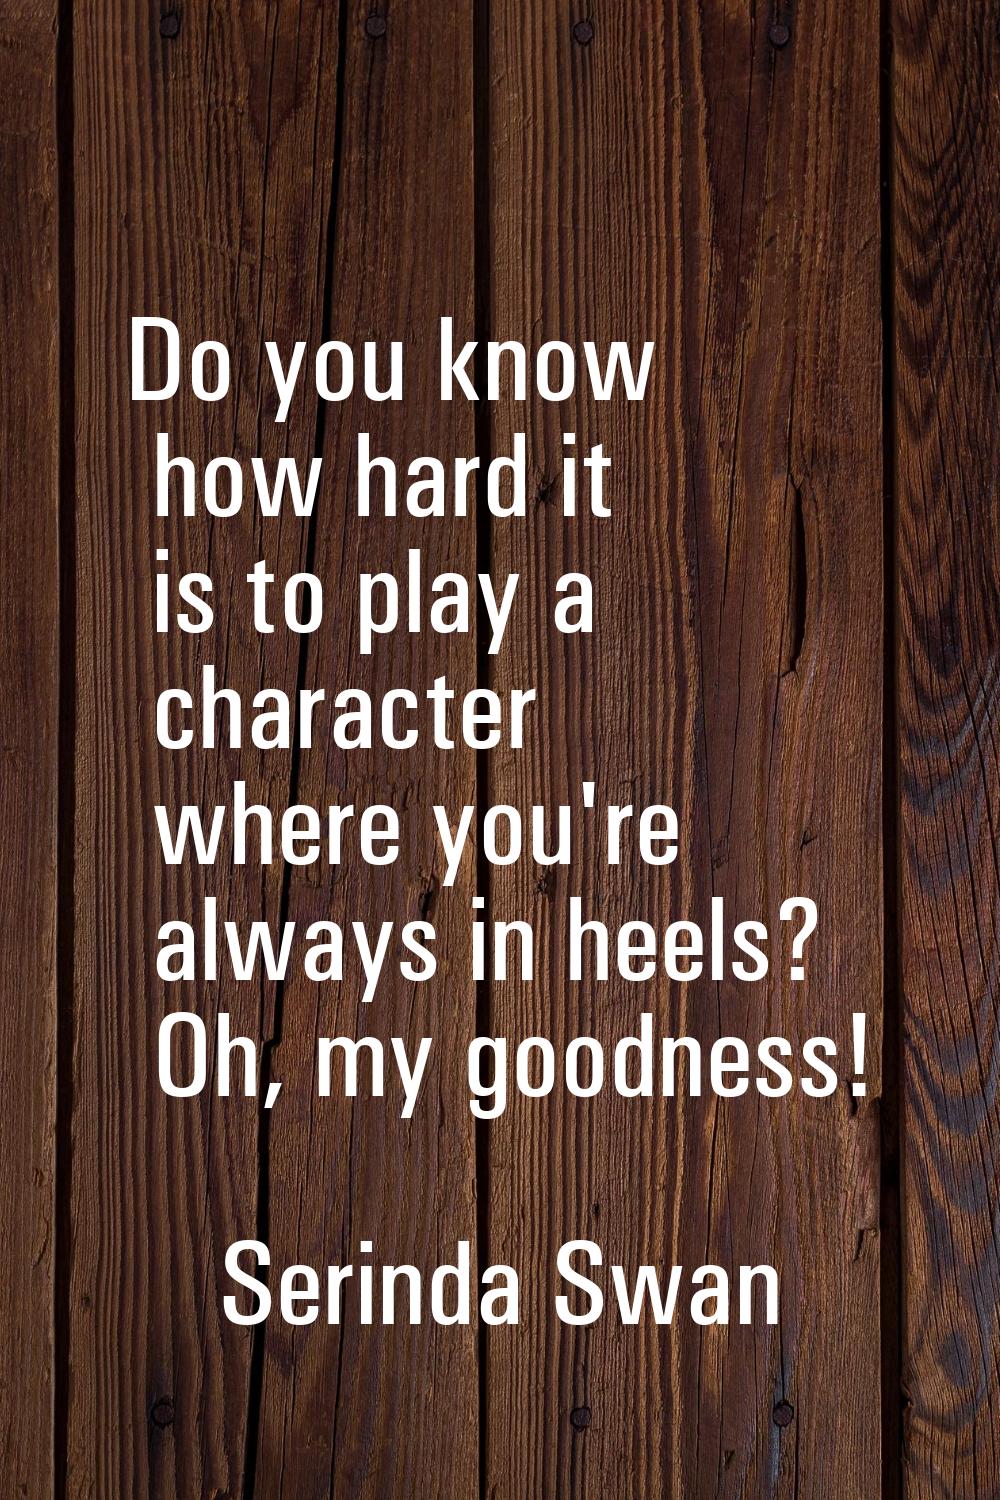 Do you know how hard it is to play a character where you're always in heels? Oh, my goodness!